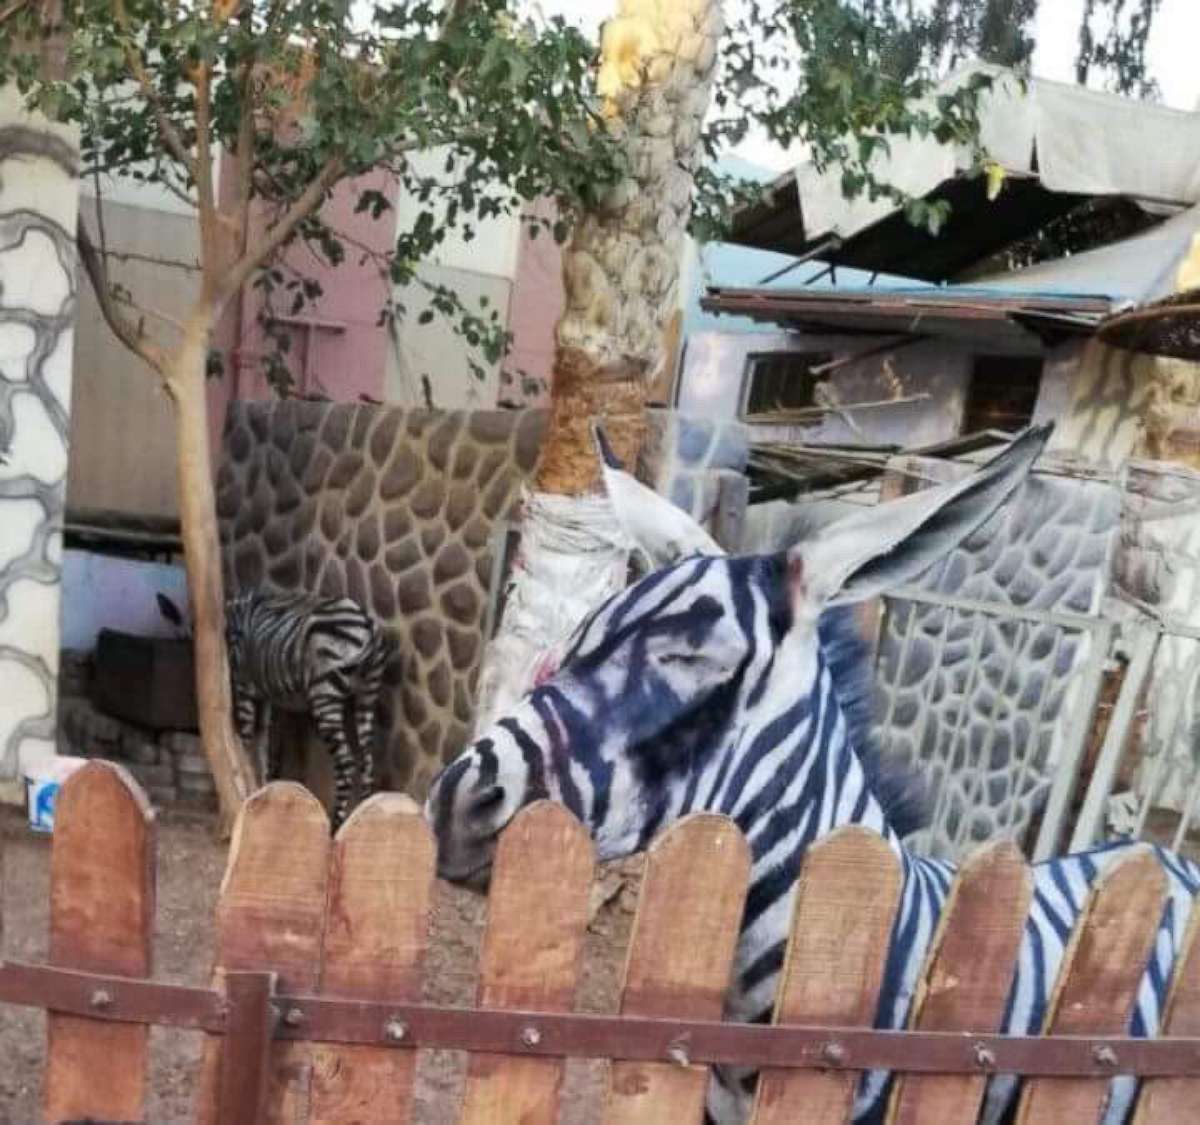 PHOTO: Zoo visitor Mahmoud Sarhan spotted what he said was a donkey painted to look like a zebra at International Garden public park in Cairo.